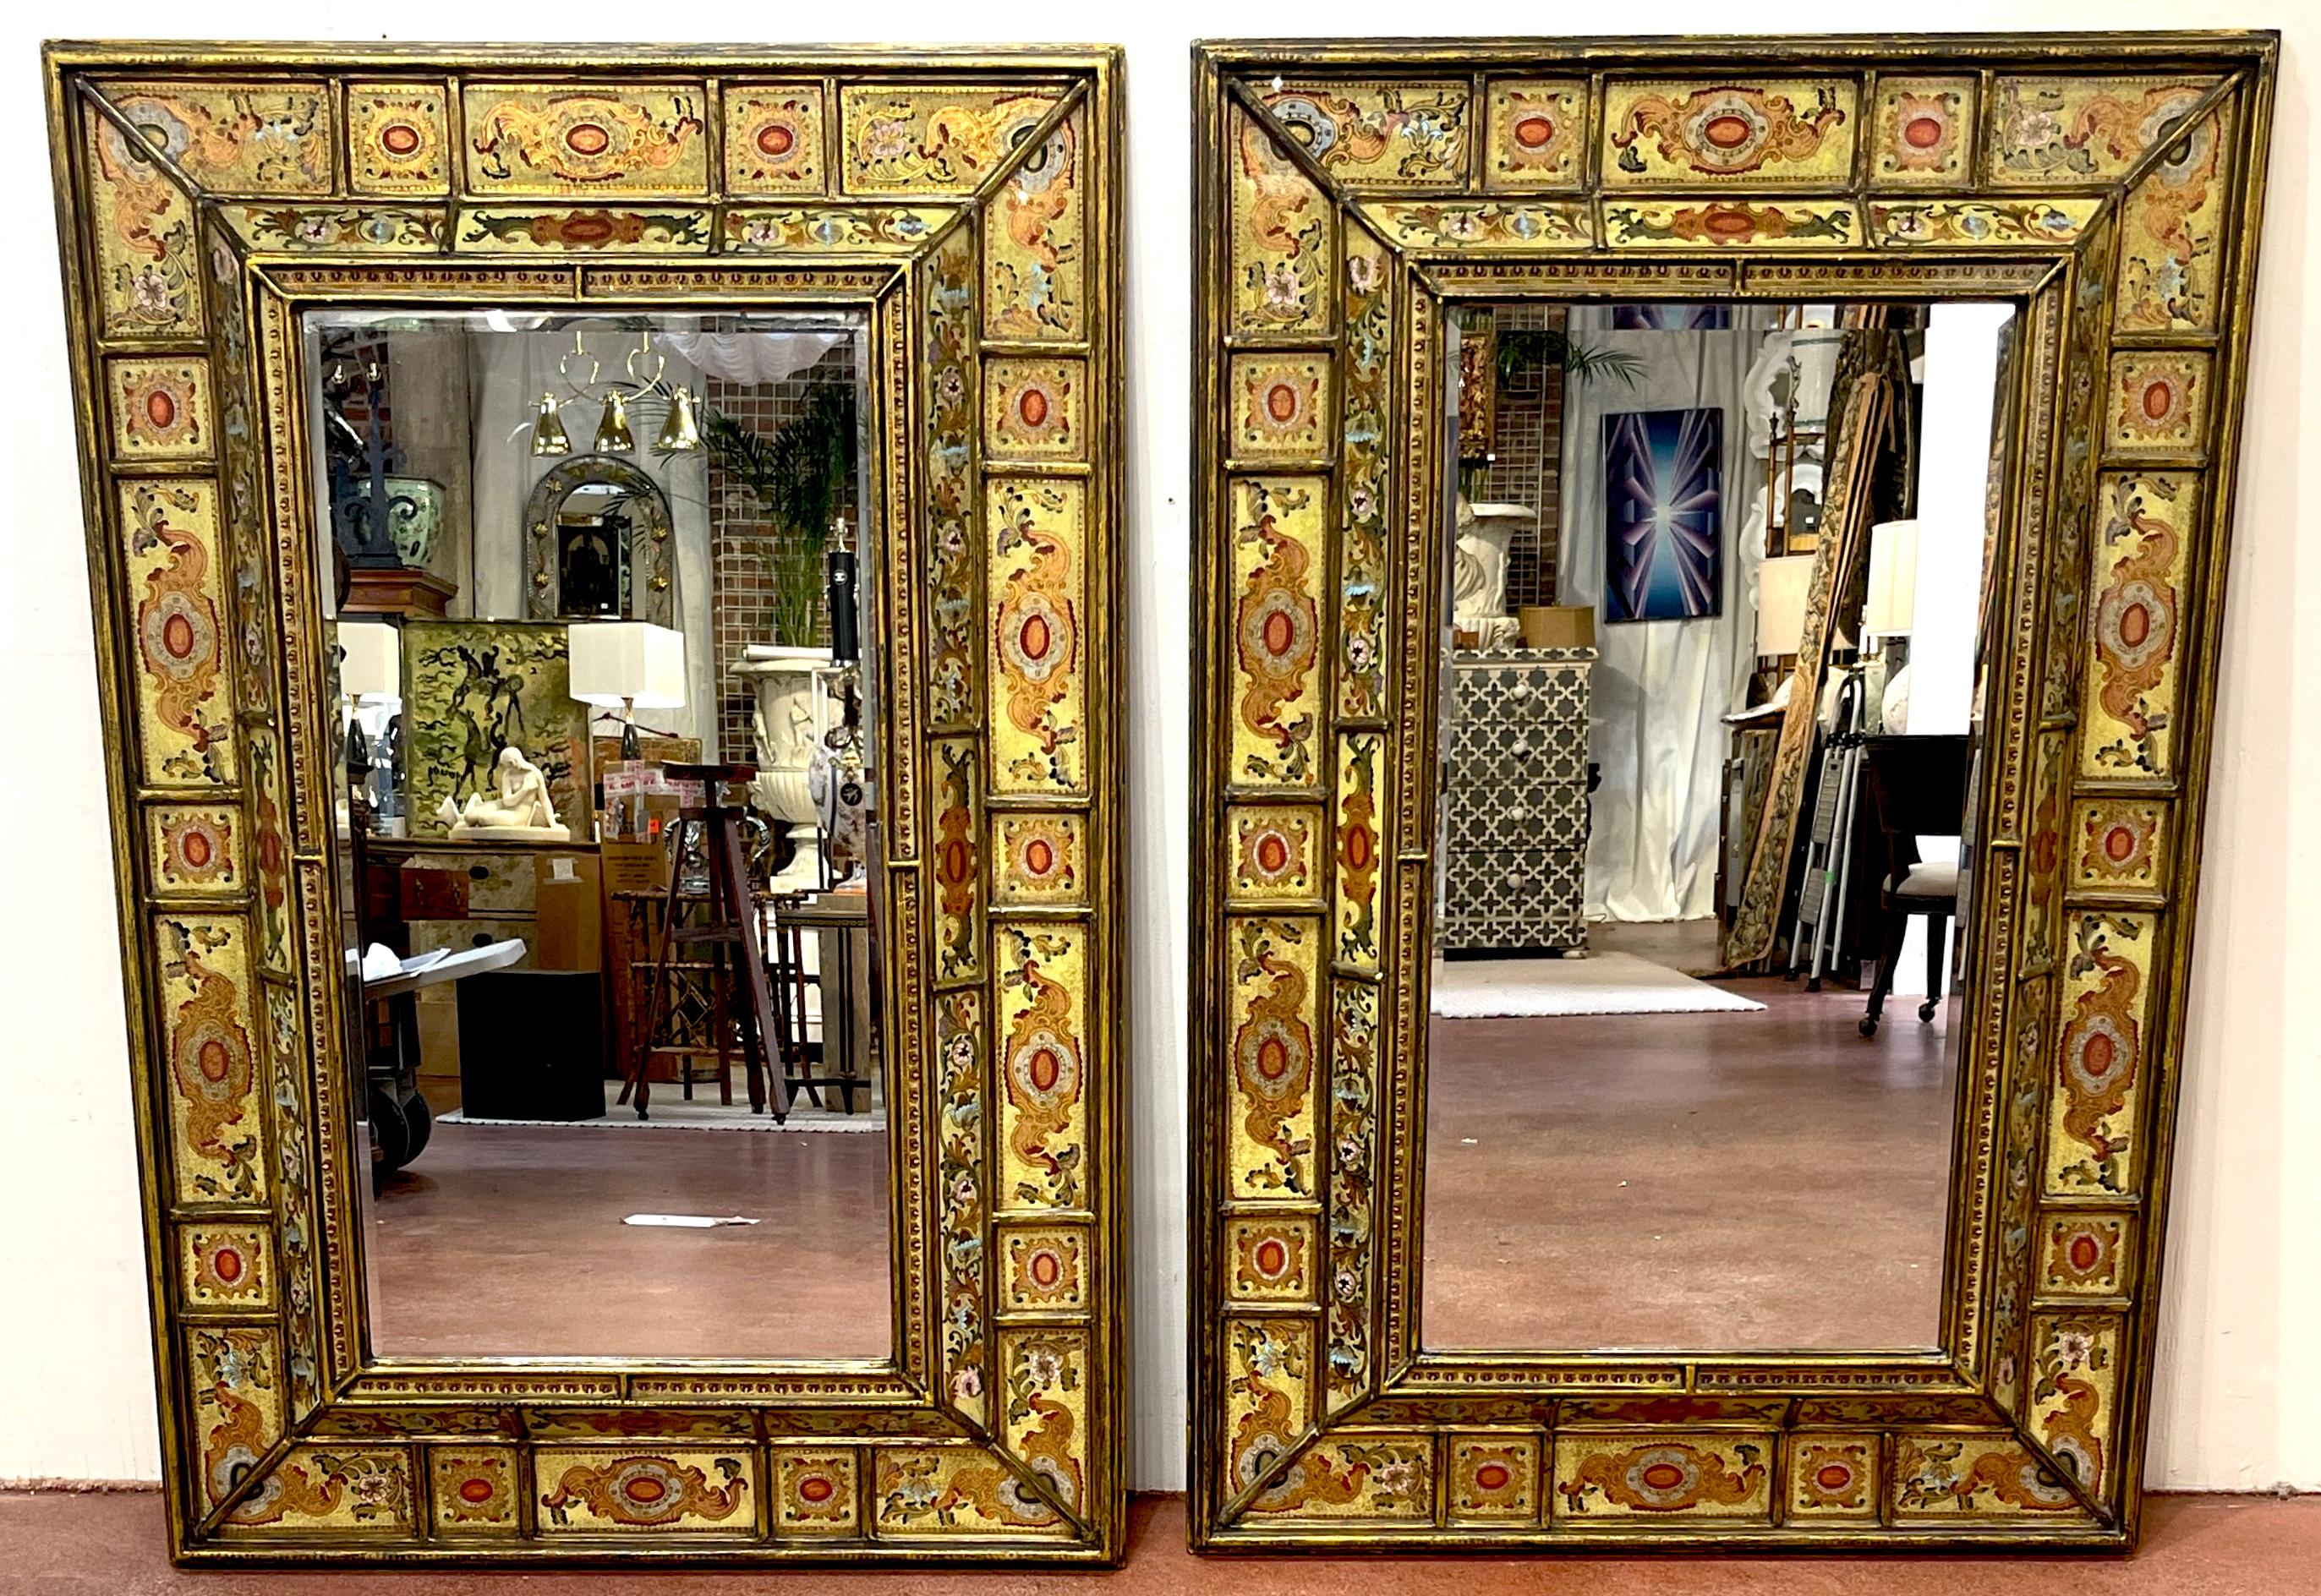 Pair of Large Spanish Colonial Eglomise Giltwood Mirrors 
Peru, Later 20th Century 

A magnificent pair of Spanish Colonial Eglomise Giltwood Mirrors, originating from Peru in the late 20th century. These mirrors exemplify the grandeur and